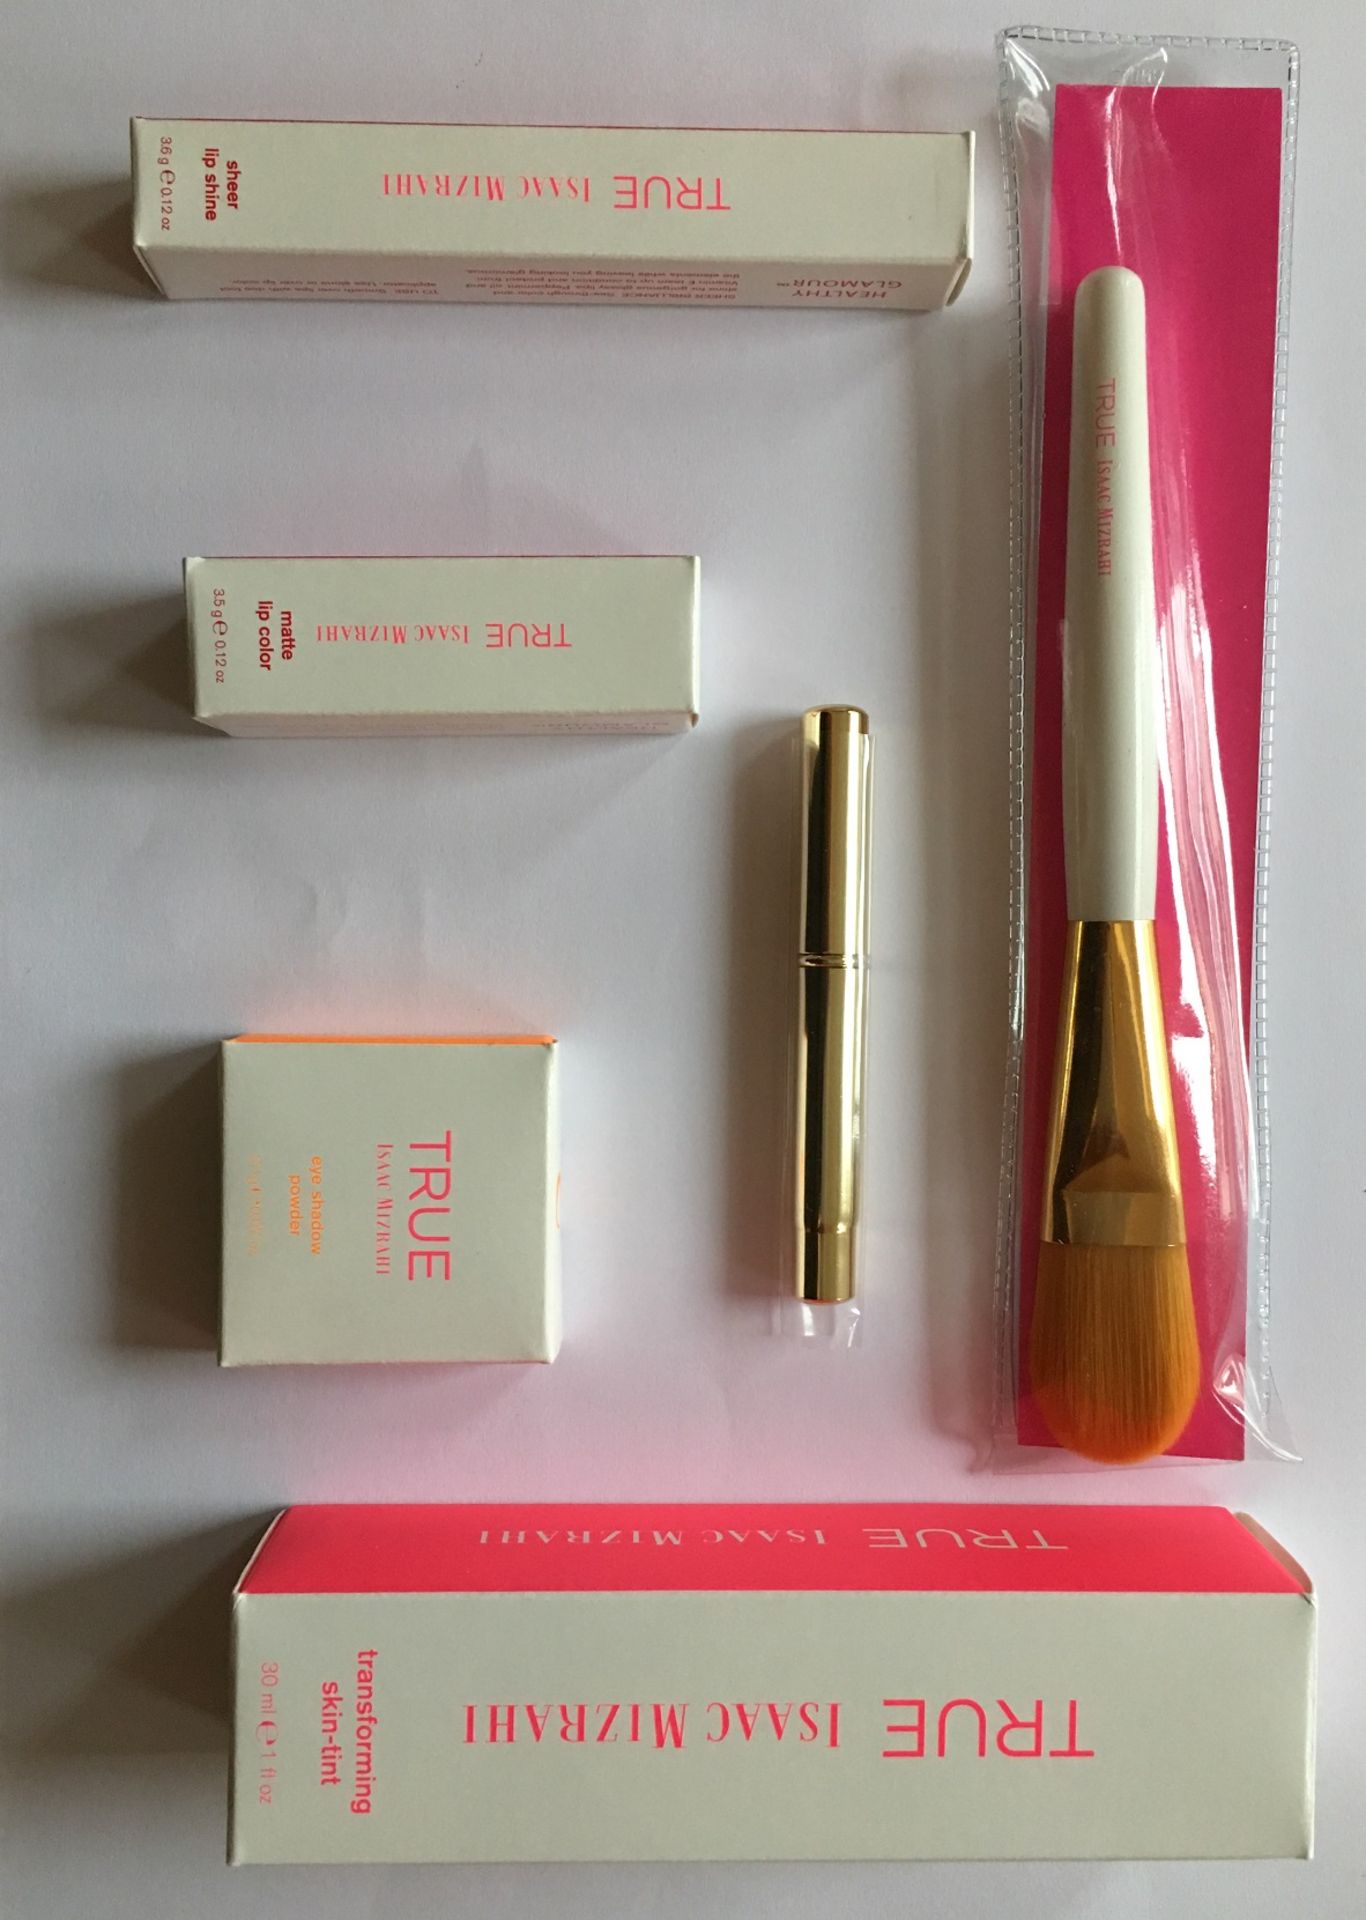 100 x True by Issac Mizrahi – 6 Gift Item Set RRP £60 per set Each set is individually packed in a